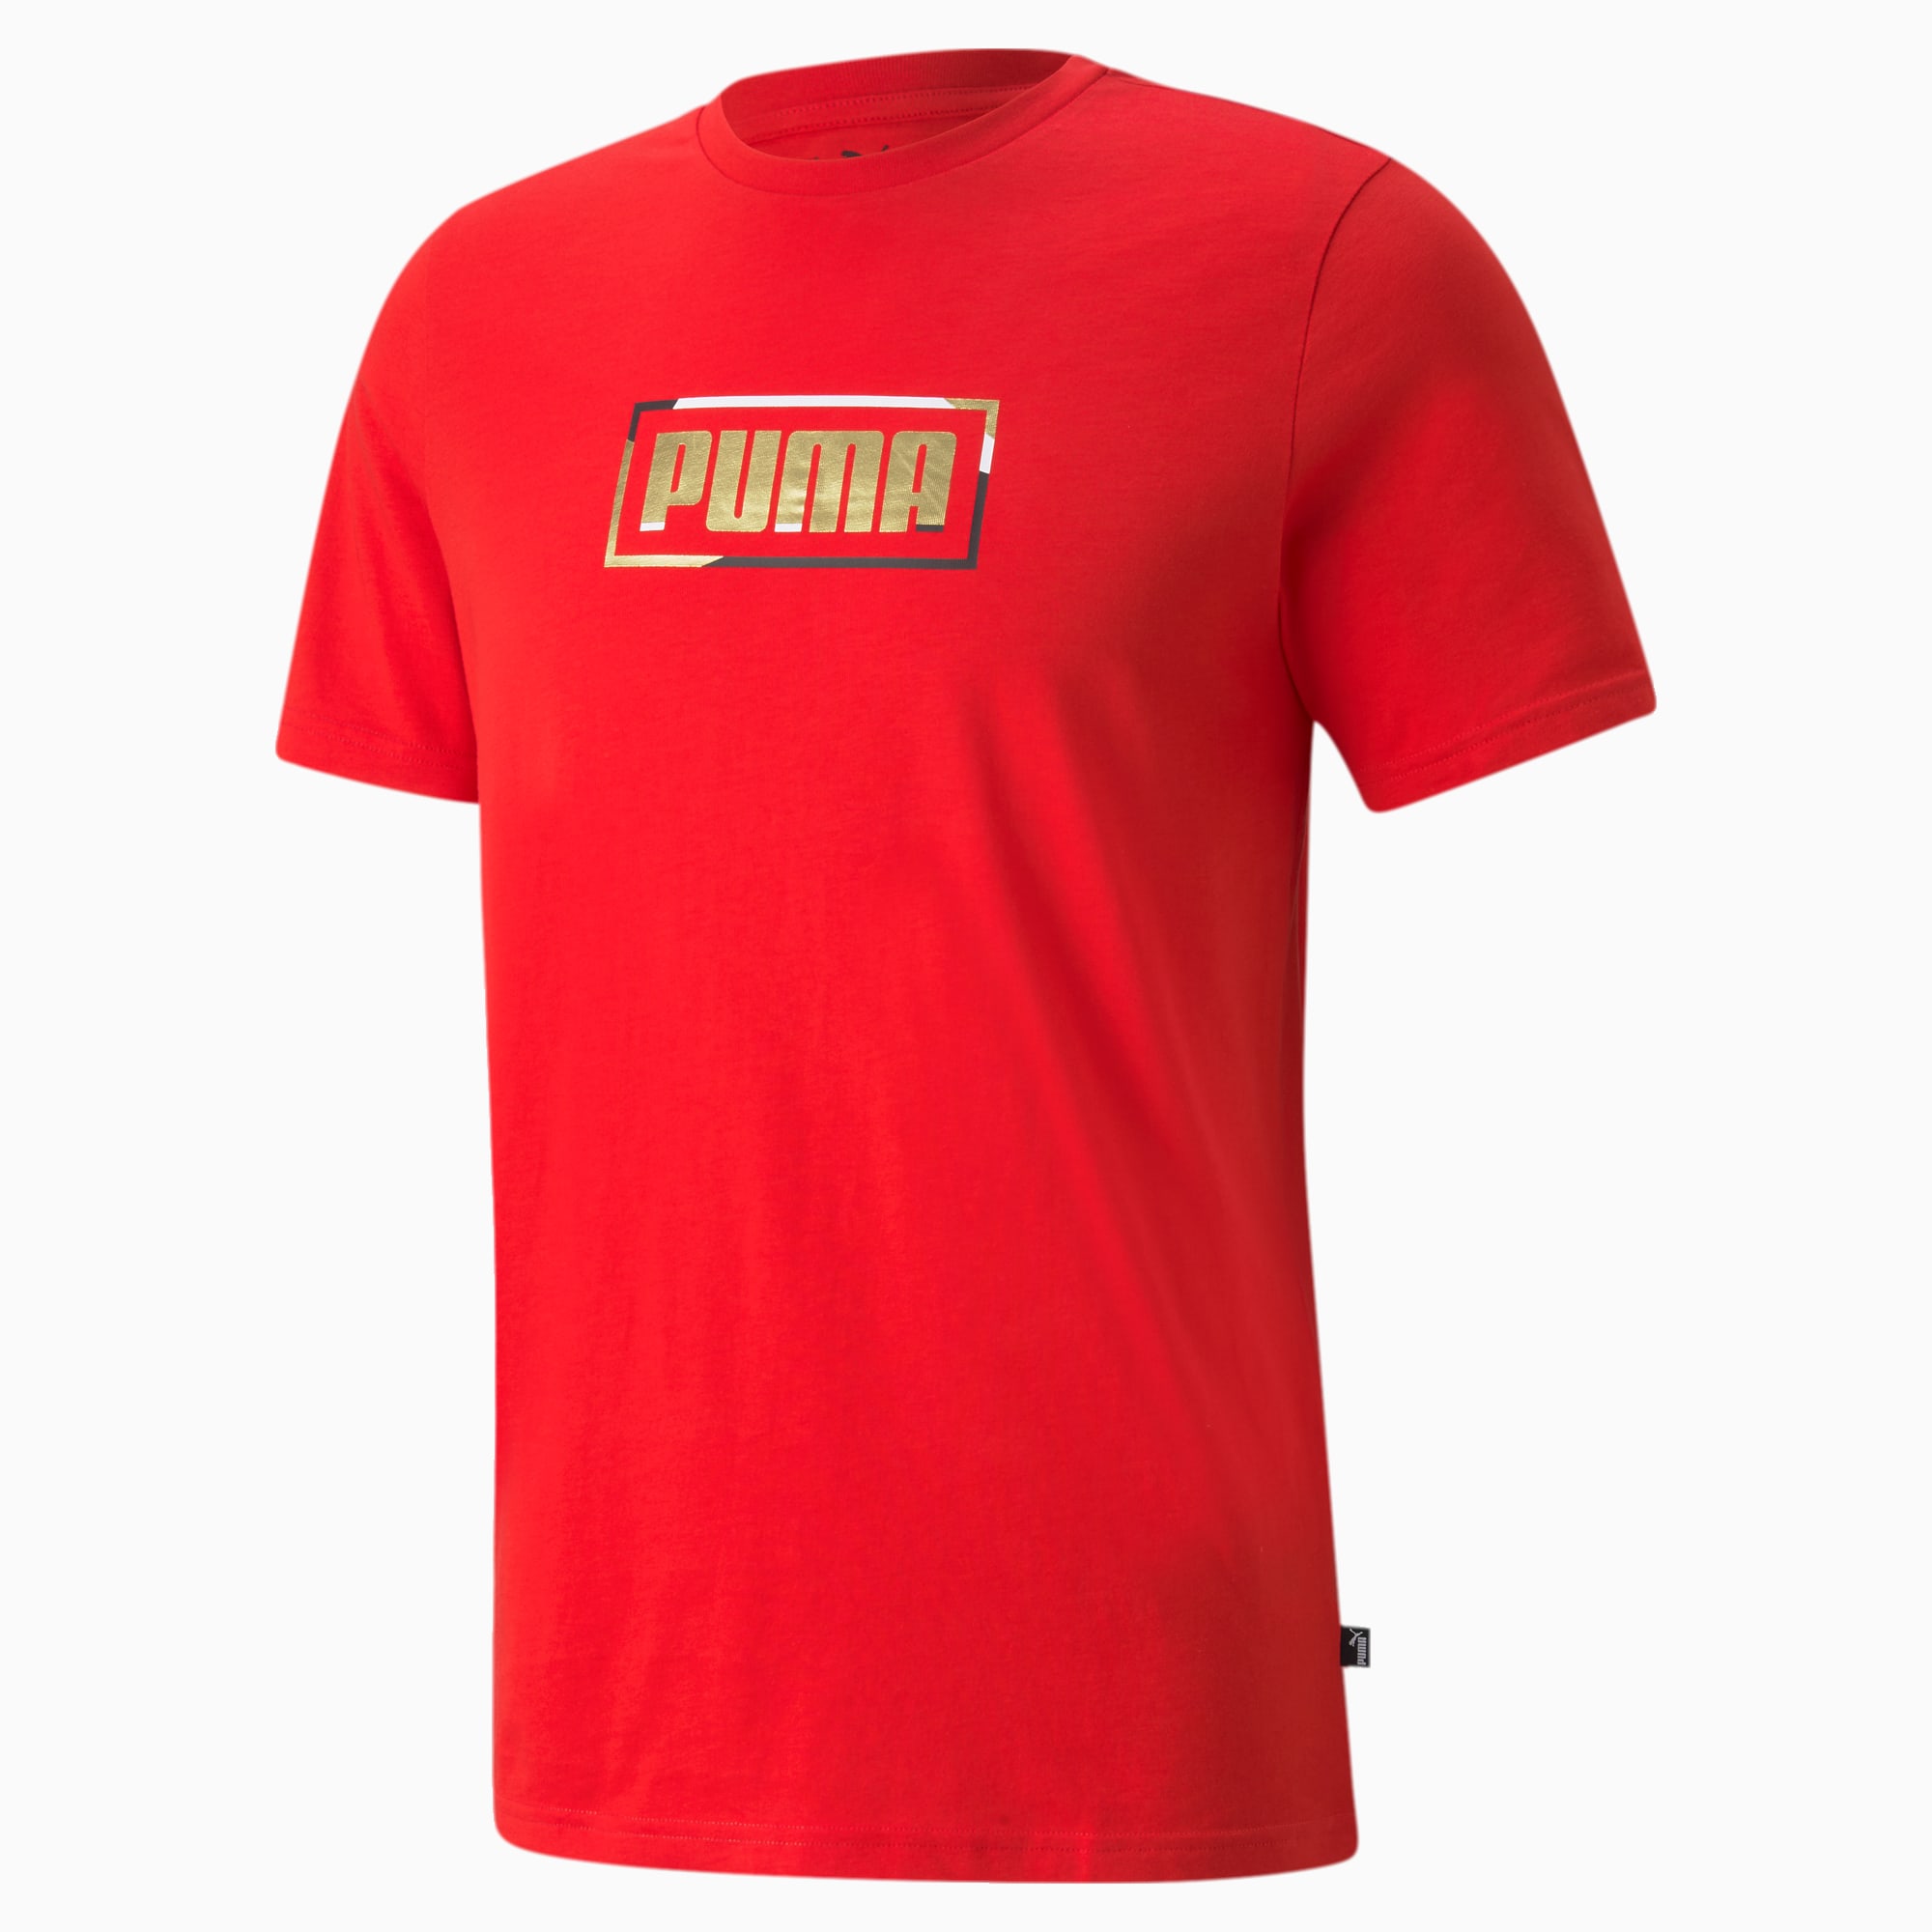 TRADEMARK™ T-shirt SPORTISYOURGANG™ Black - Double Red